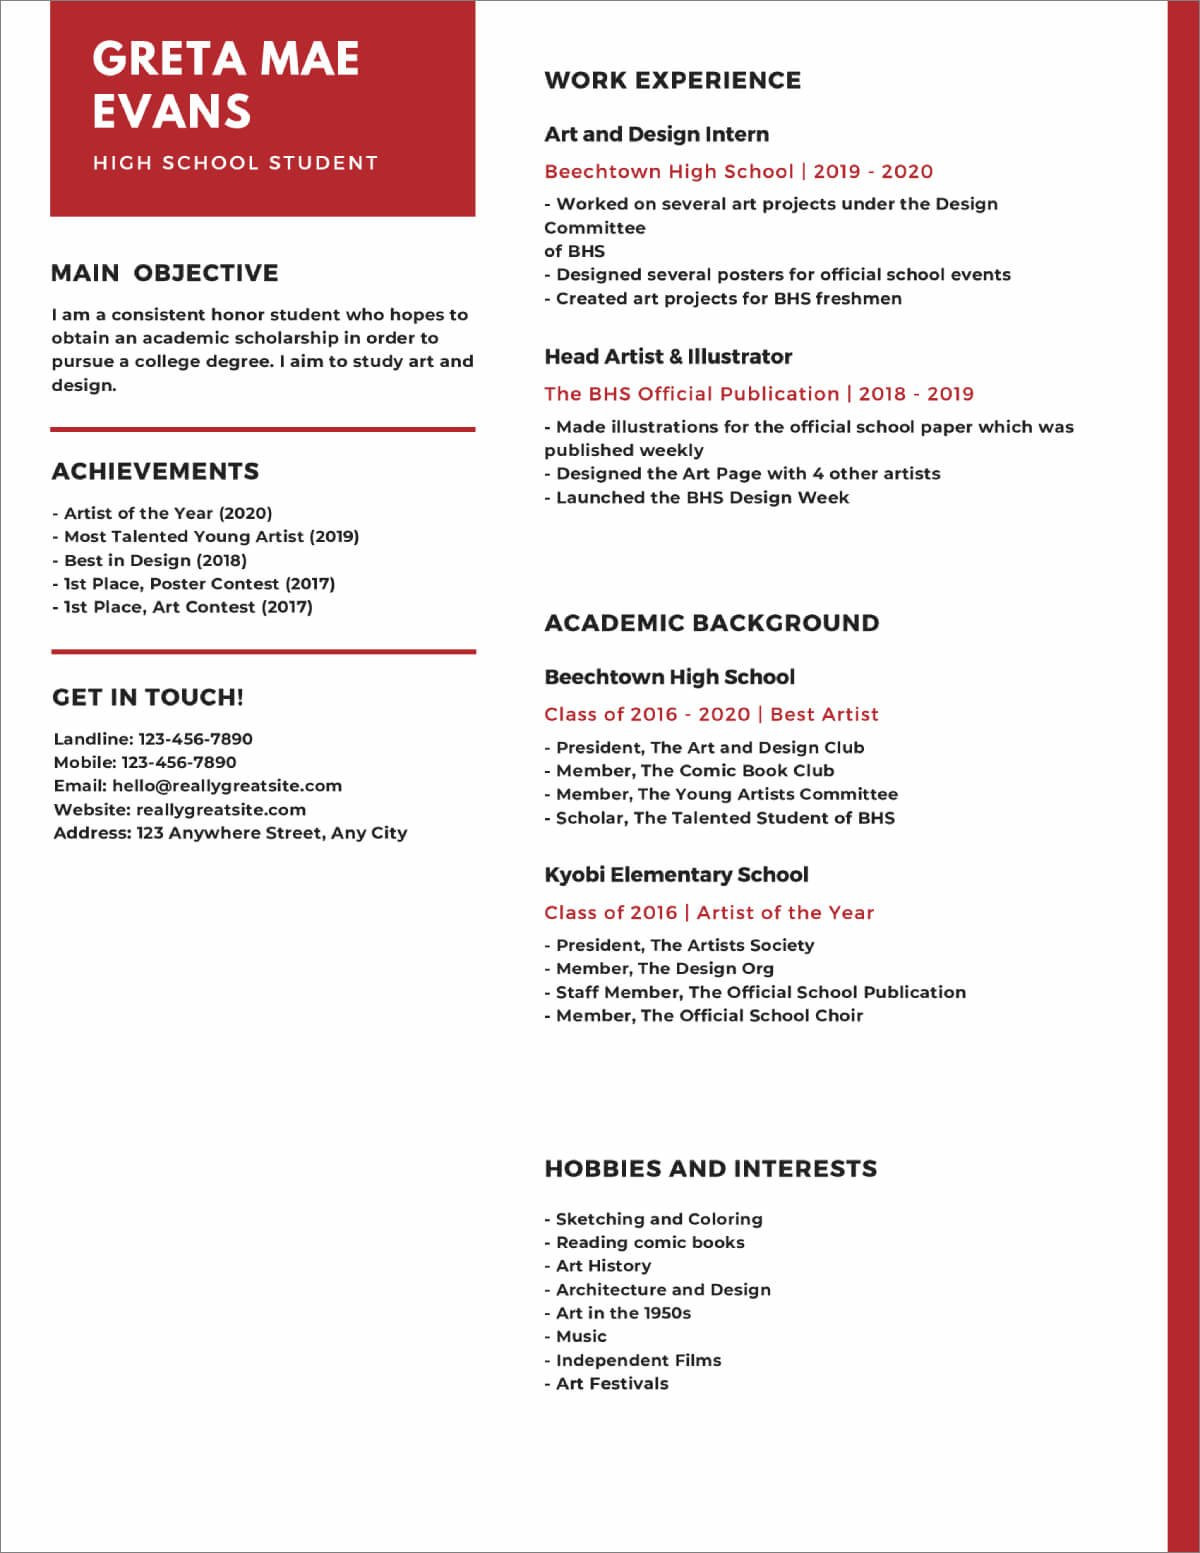 Free High School Resume Template Download 20lancarrezekiq High School Resume Templates [download now]